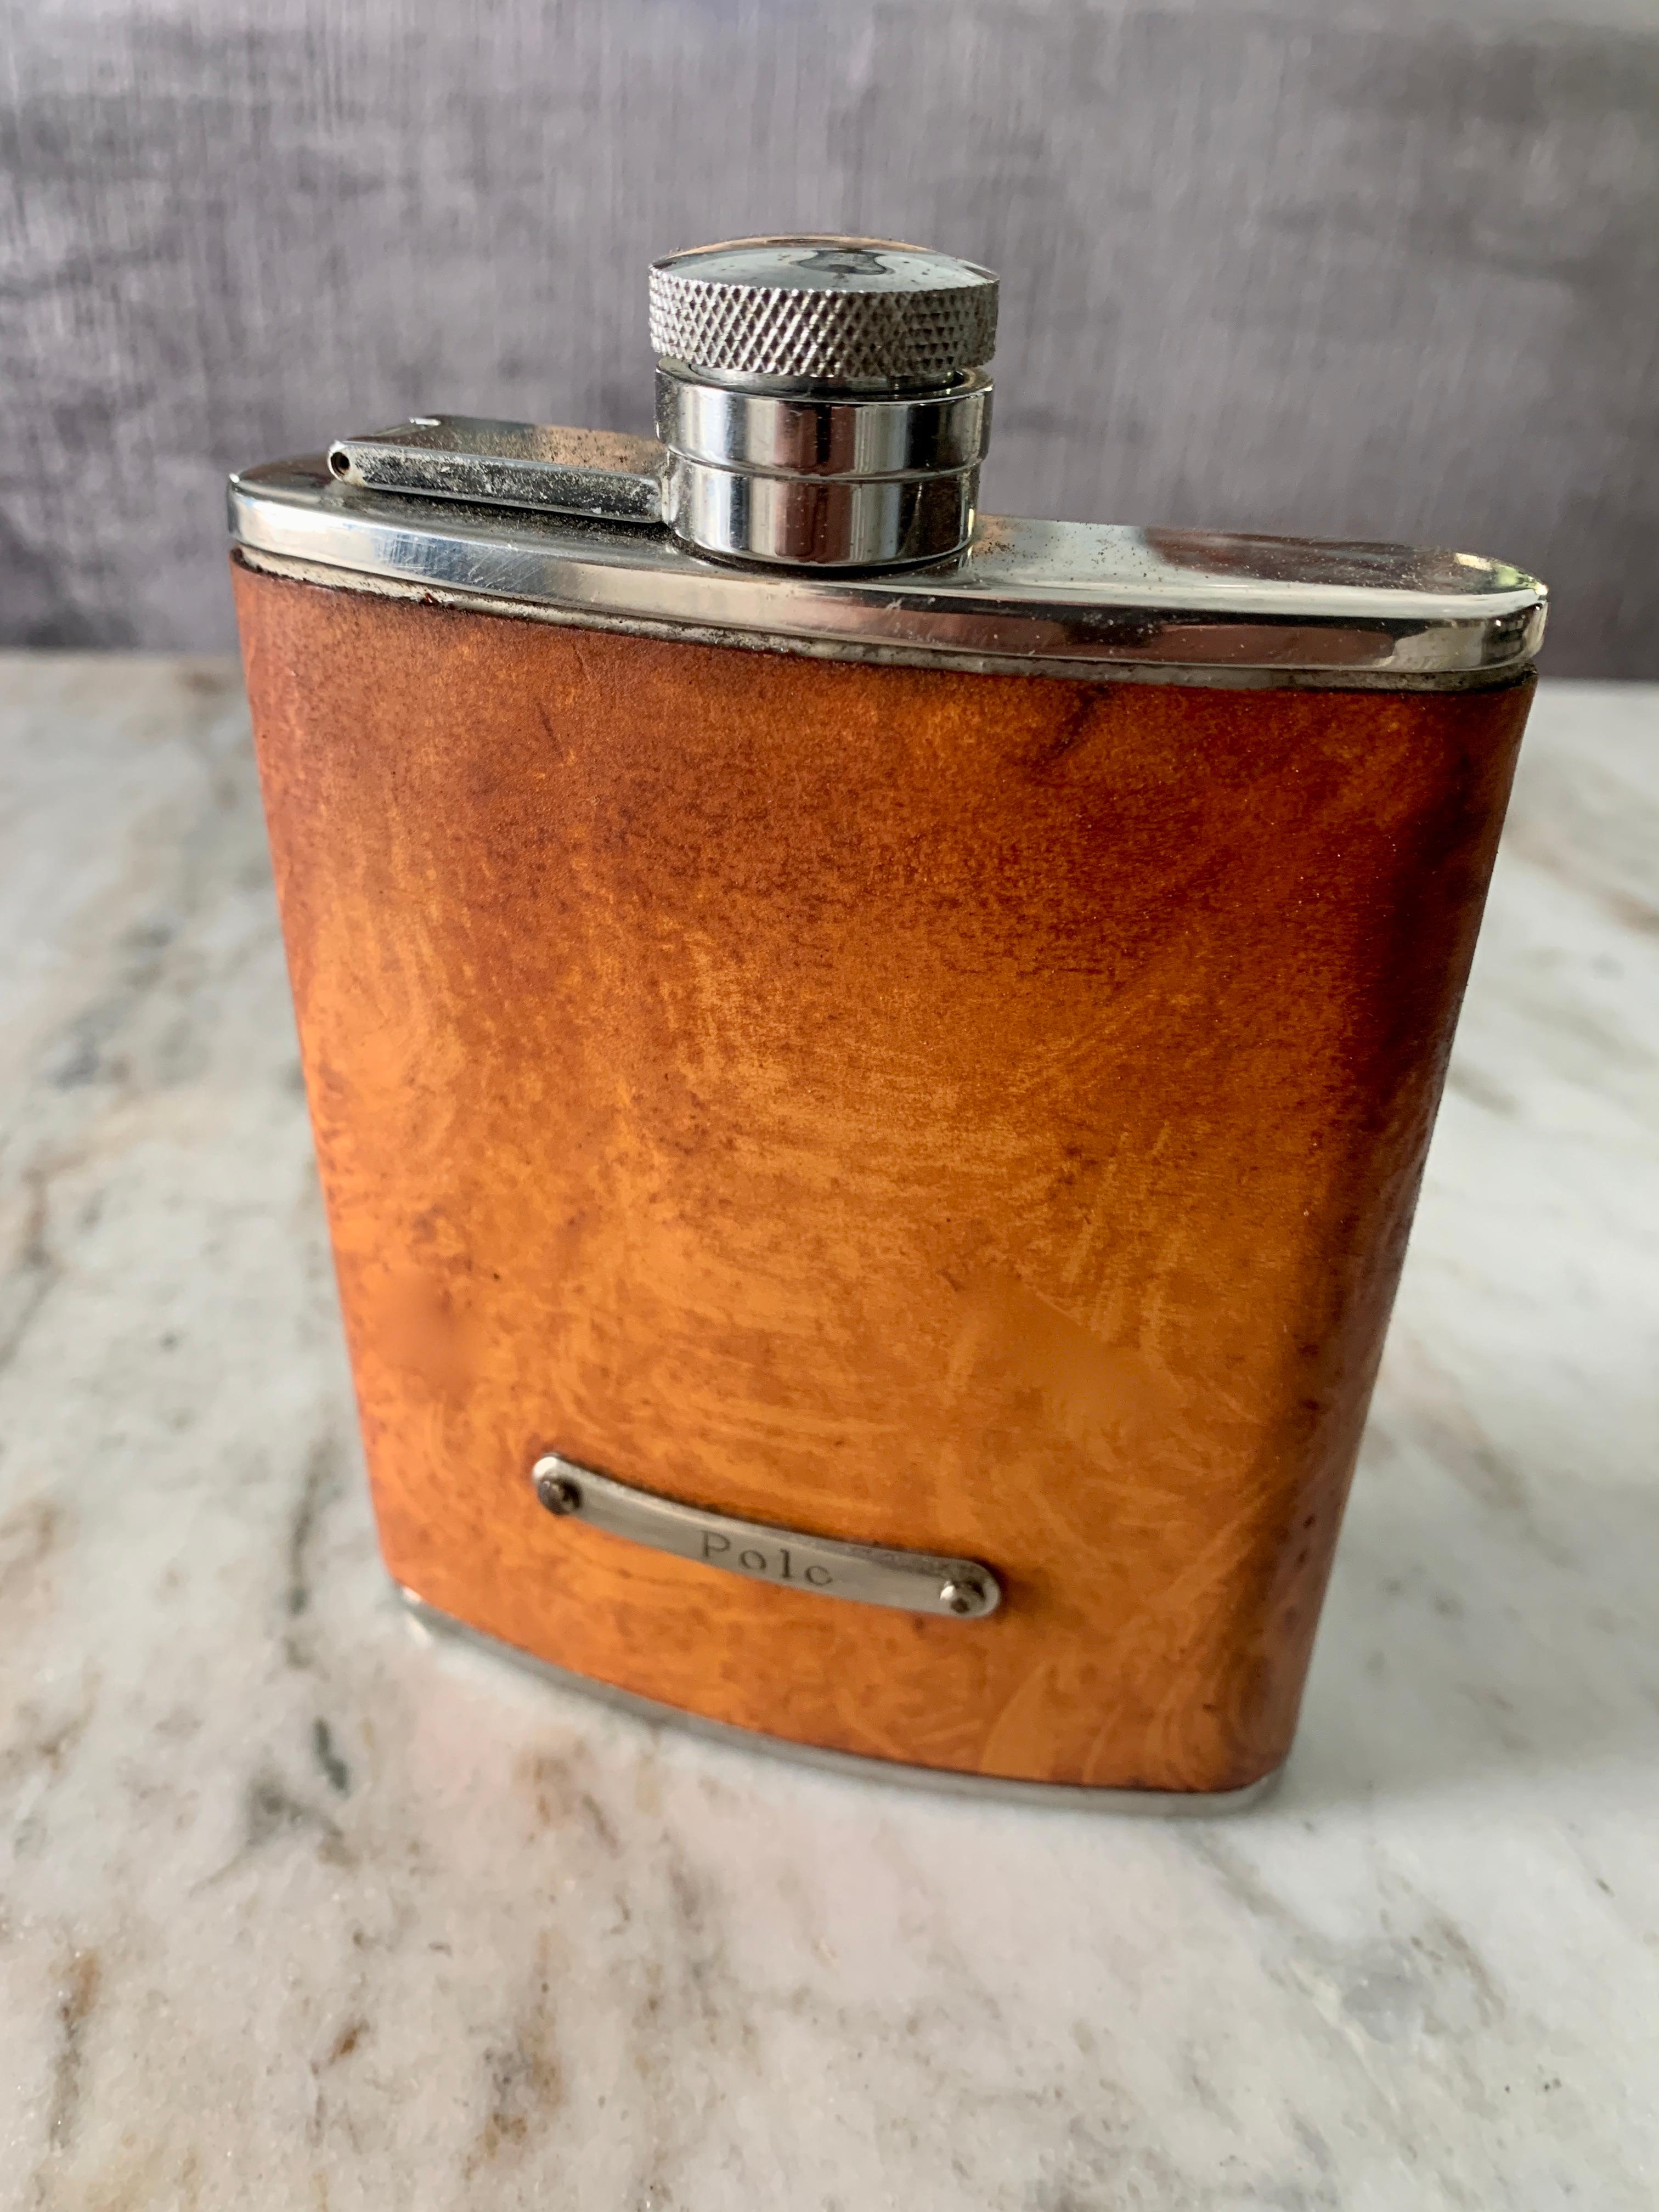 Patinated leather flask with hand stitching and polo emblem on front. The stainless steel cap unscrews but stays attached... have a night cap and don't lose your cap! Fits wonderfully in any coat, or pant pocket... or in your purse! 

The